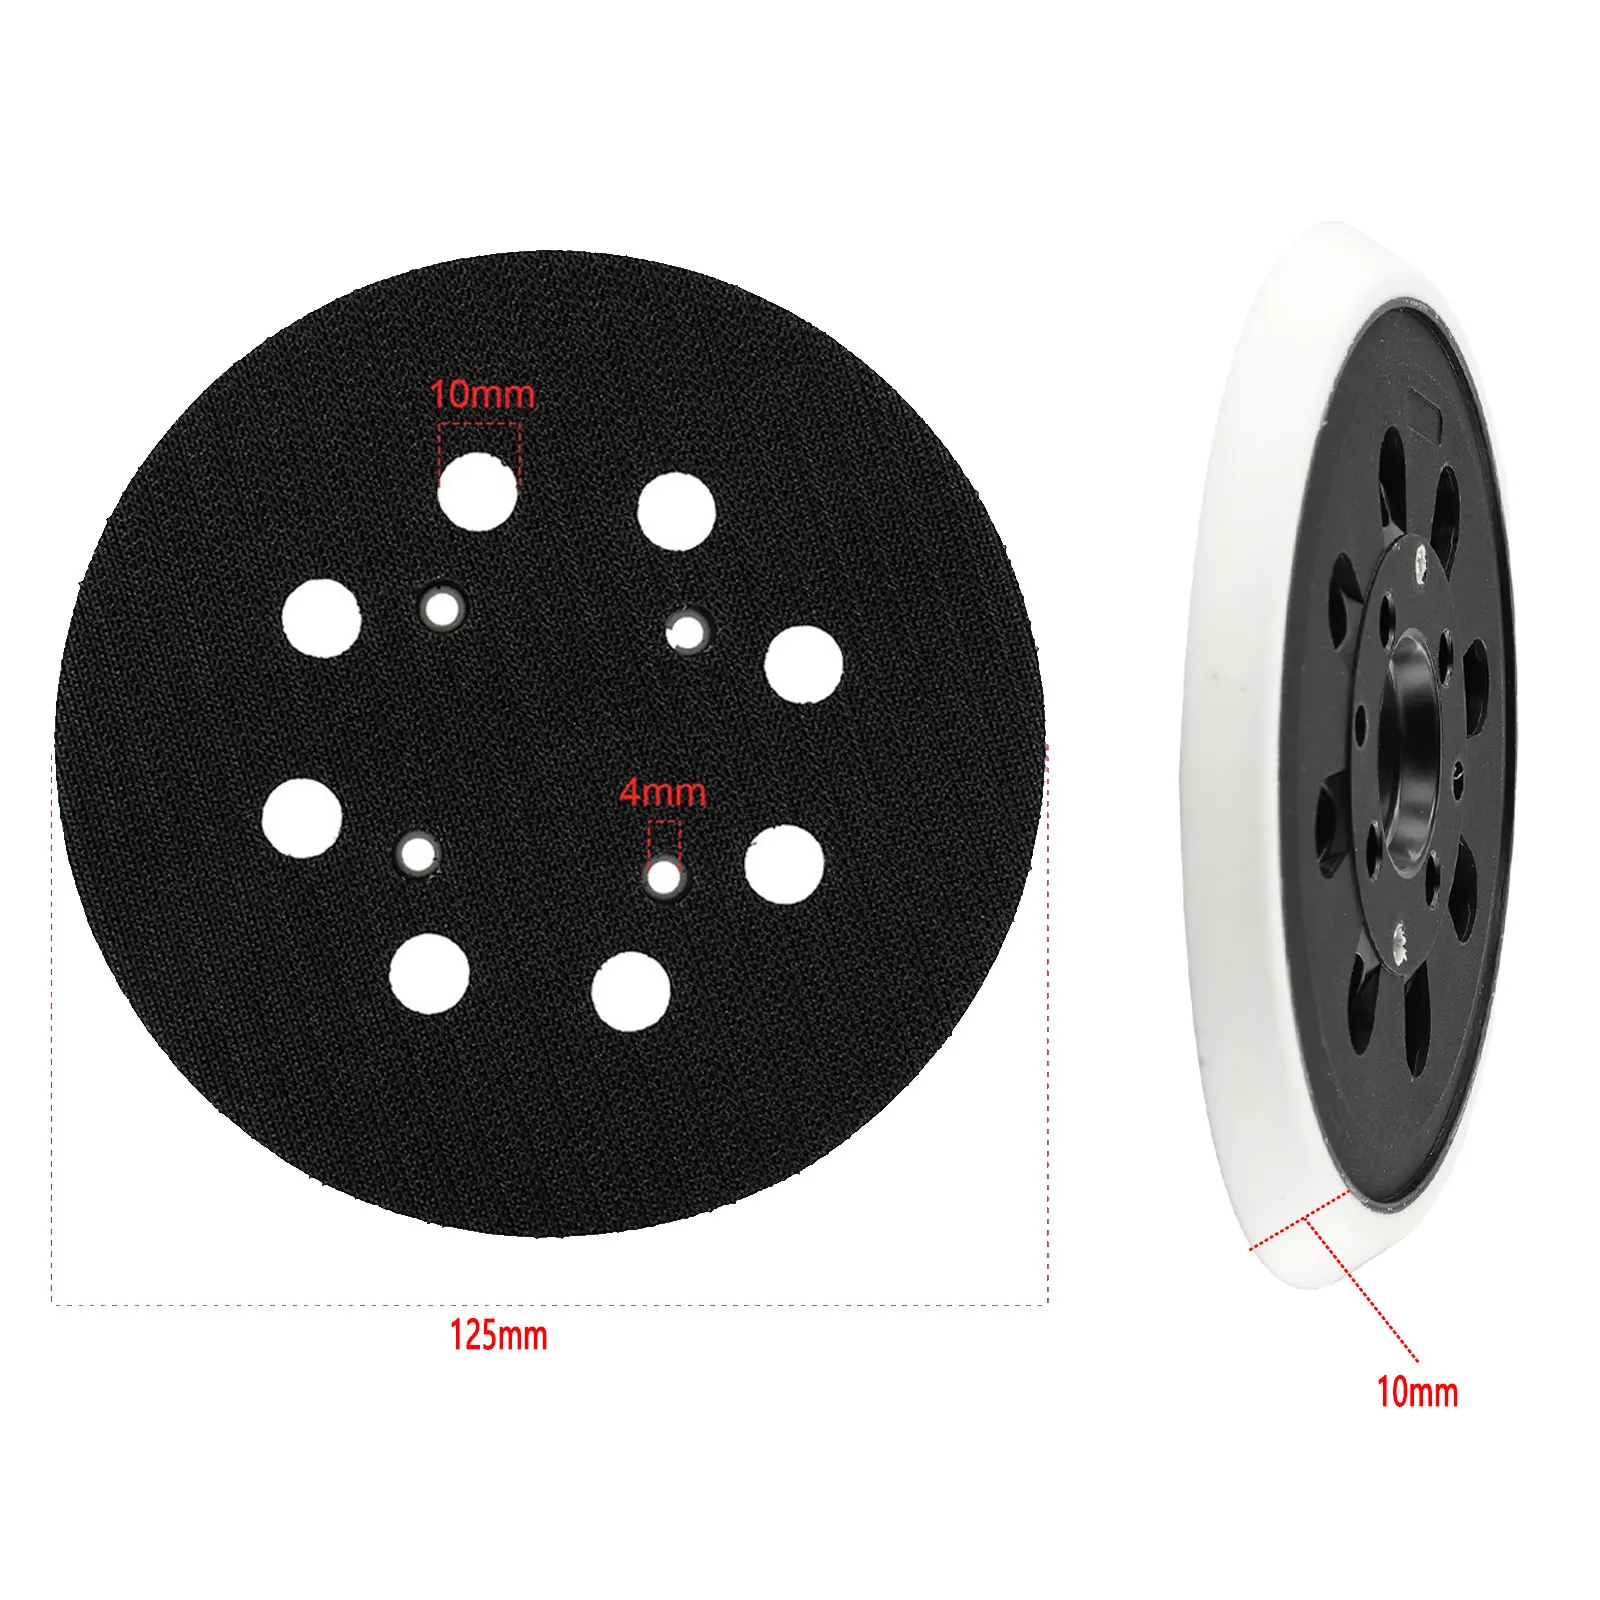 5 Inch 125mm Backing Pad Sanding Pad Hook&loop Connection For Bosch PEX 300 AE 400 AE 4000 AE Power Tools Accessories насос daewoo power products das 4000 24